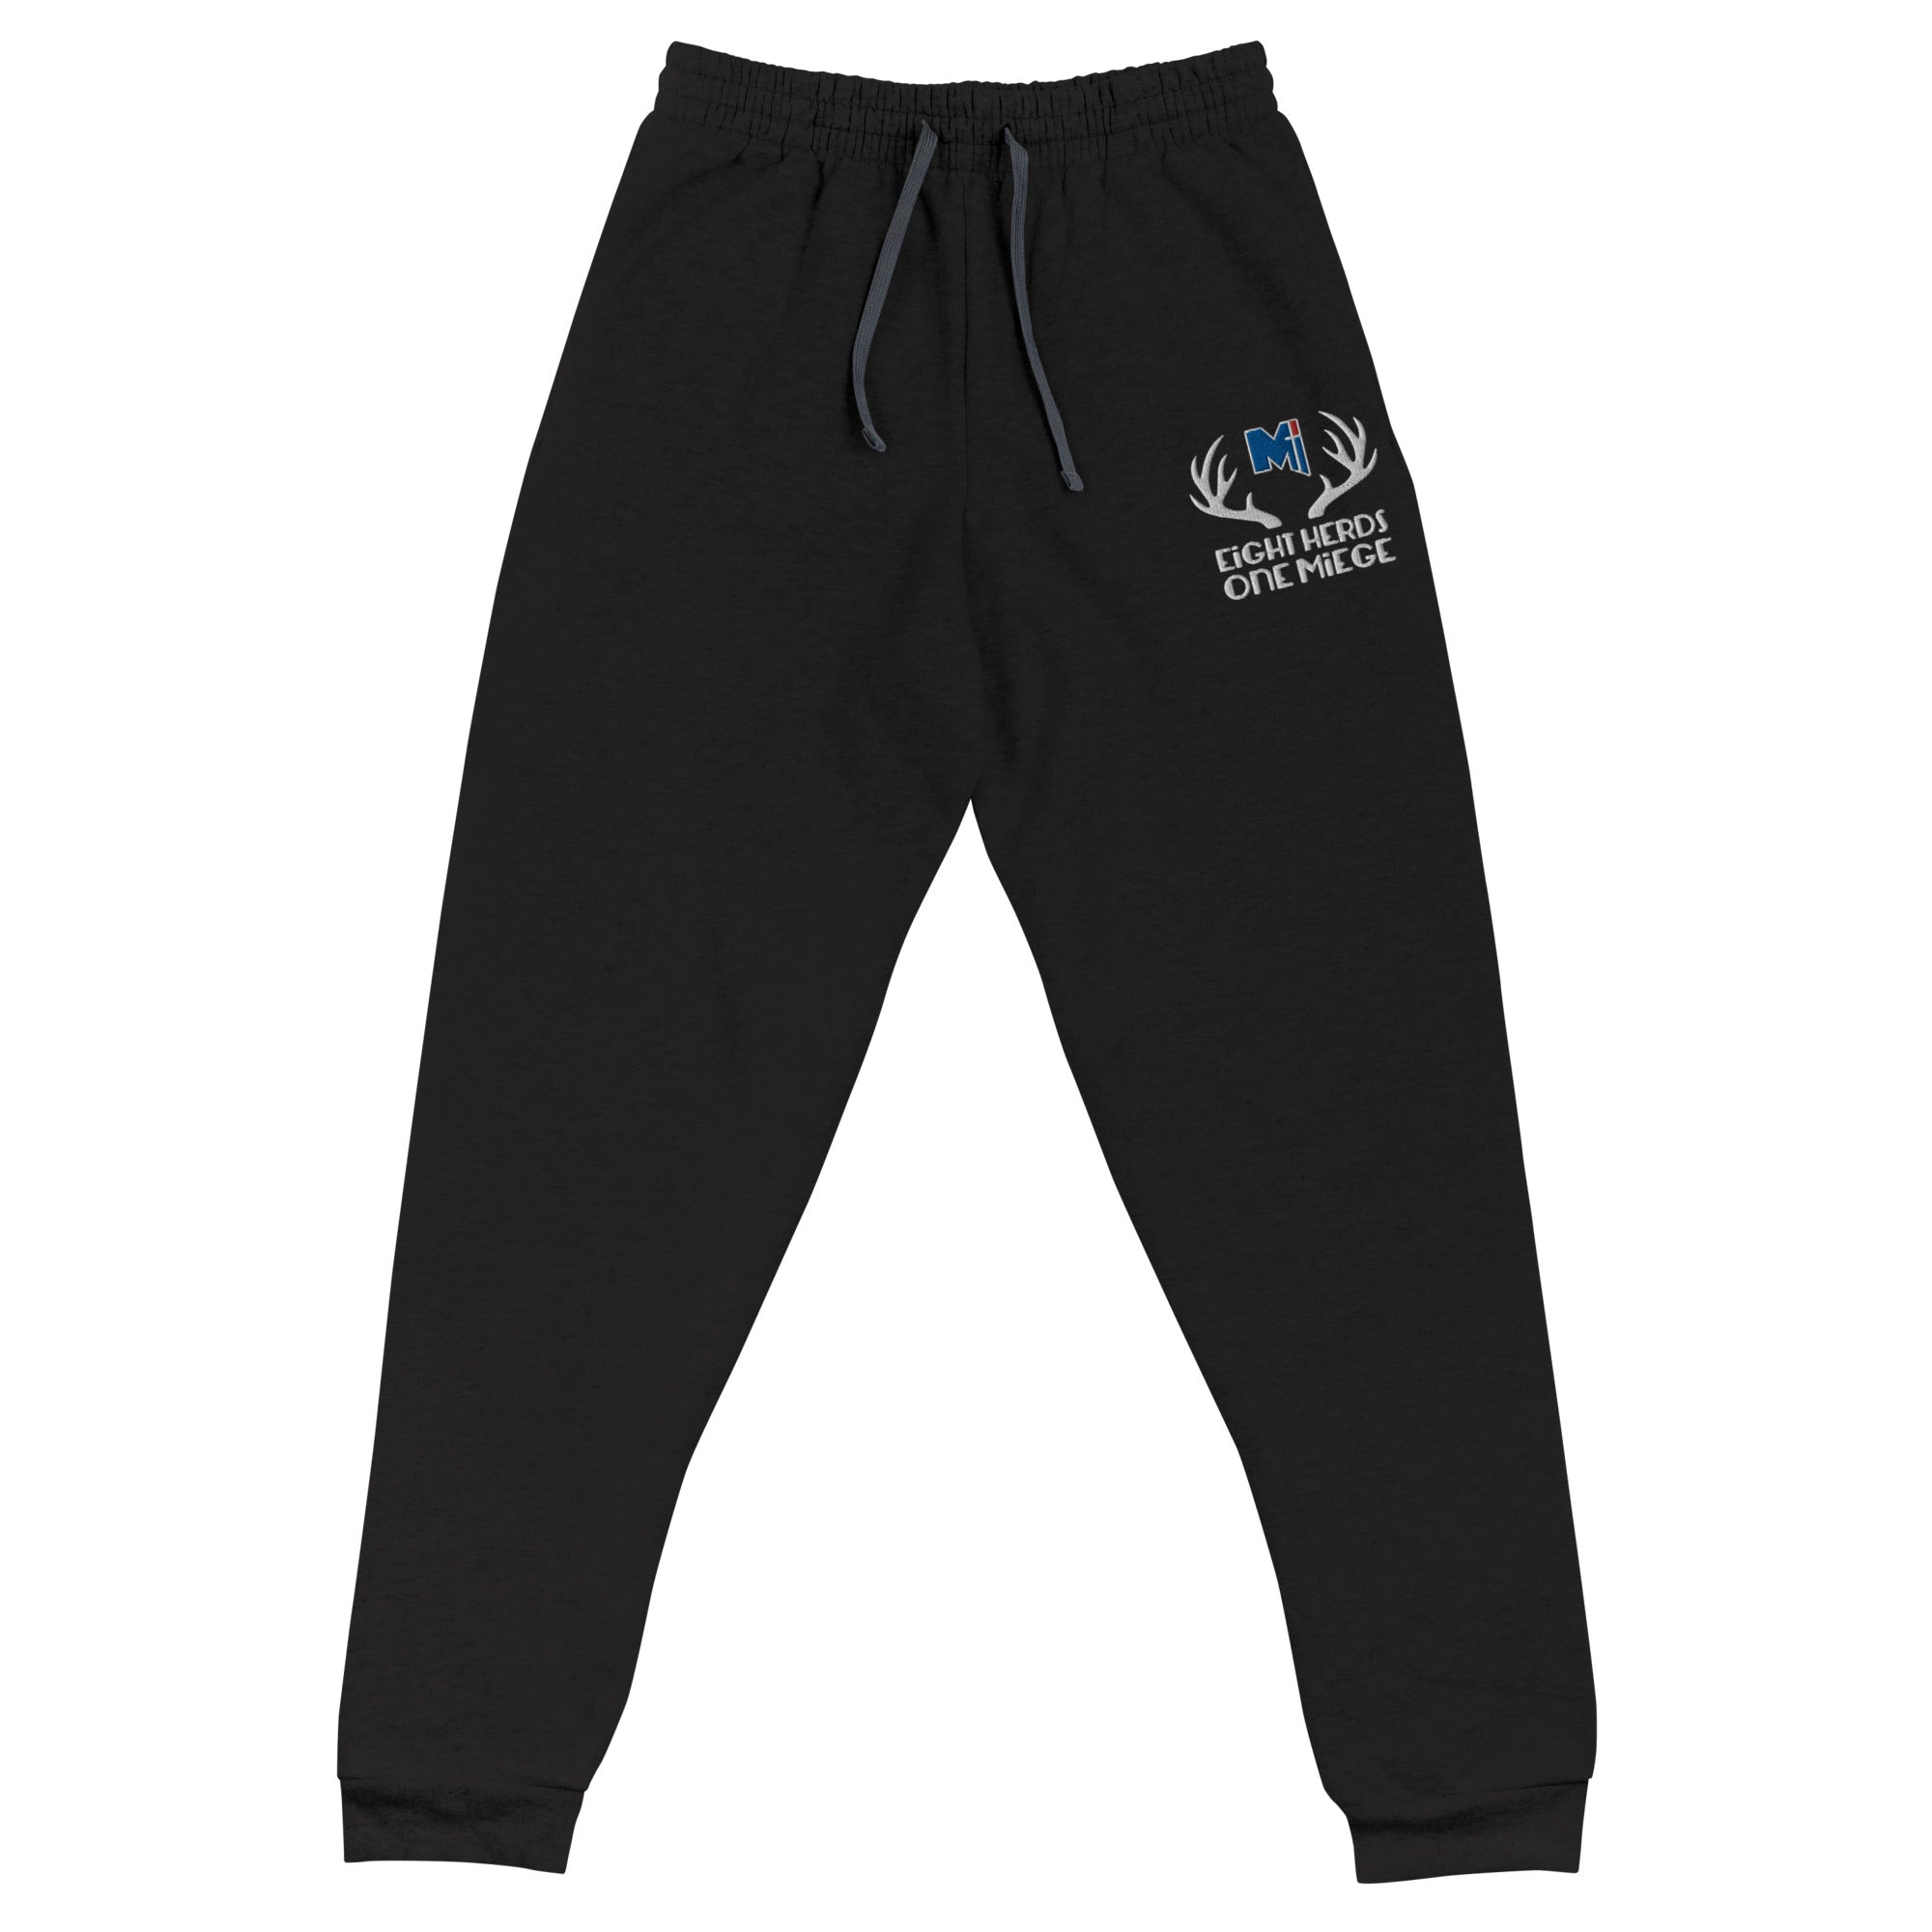 Eight Herds, One Miege Unisex Joggers